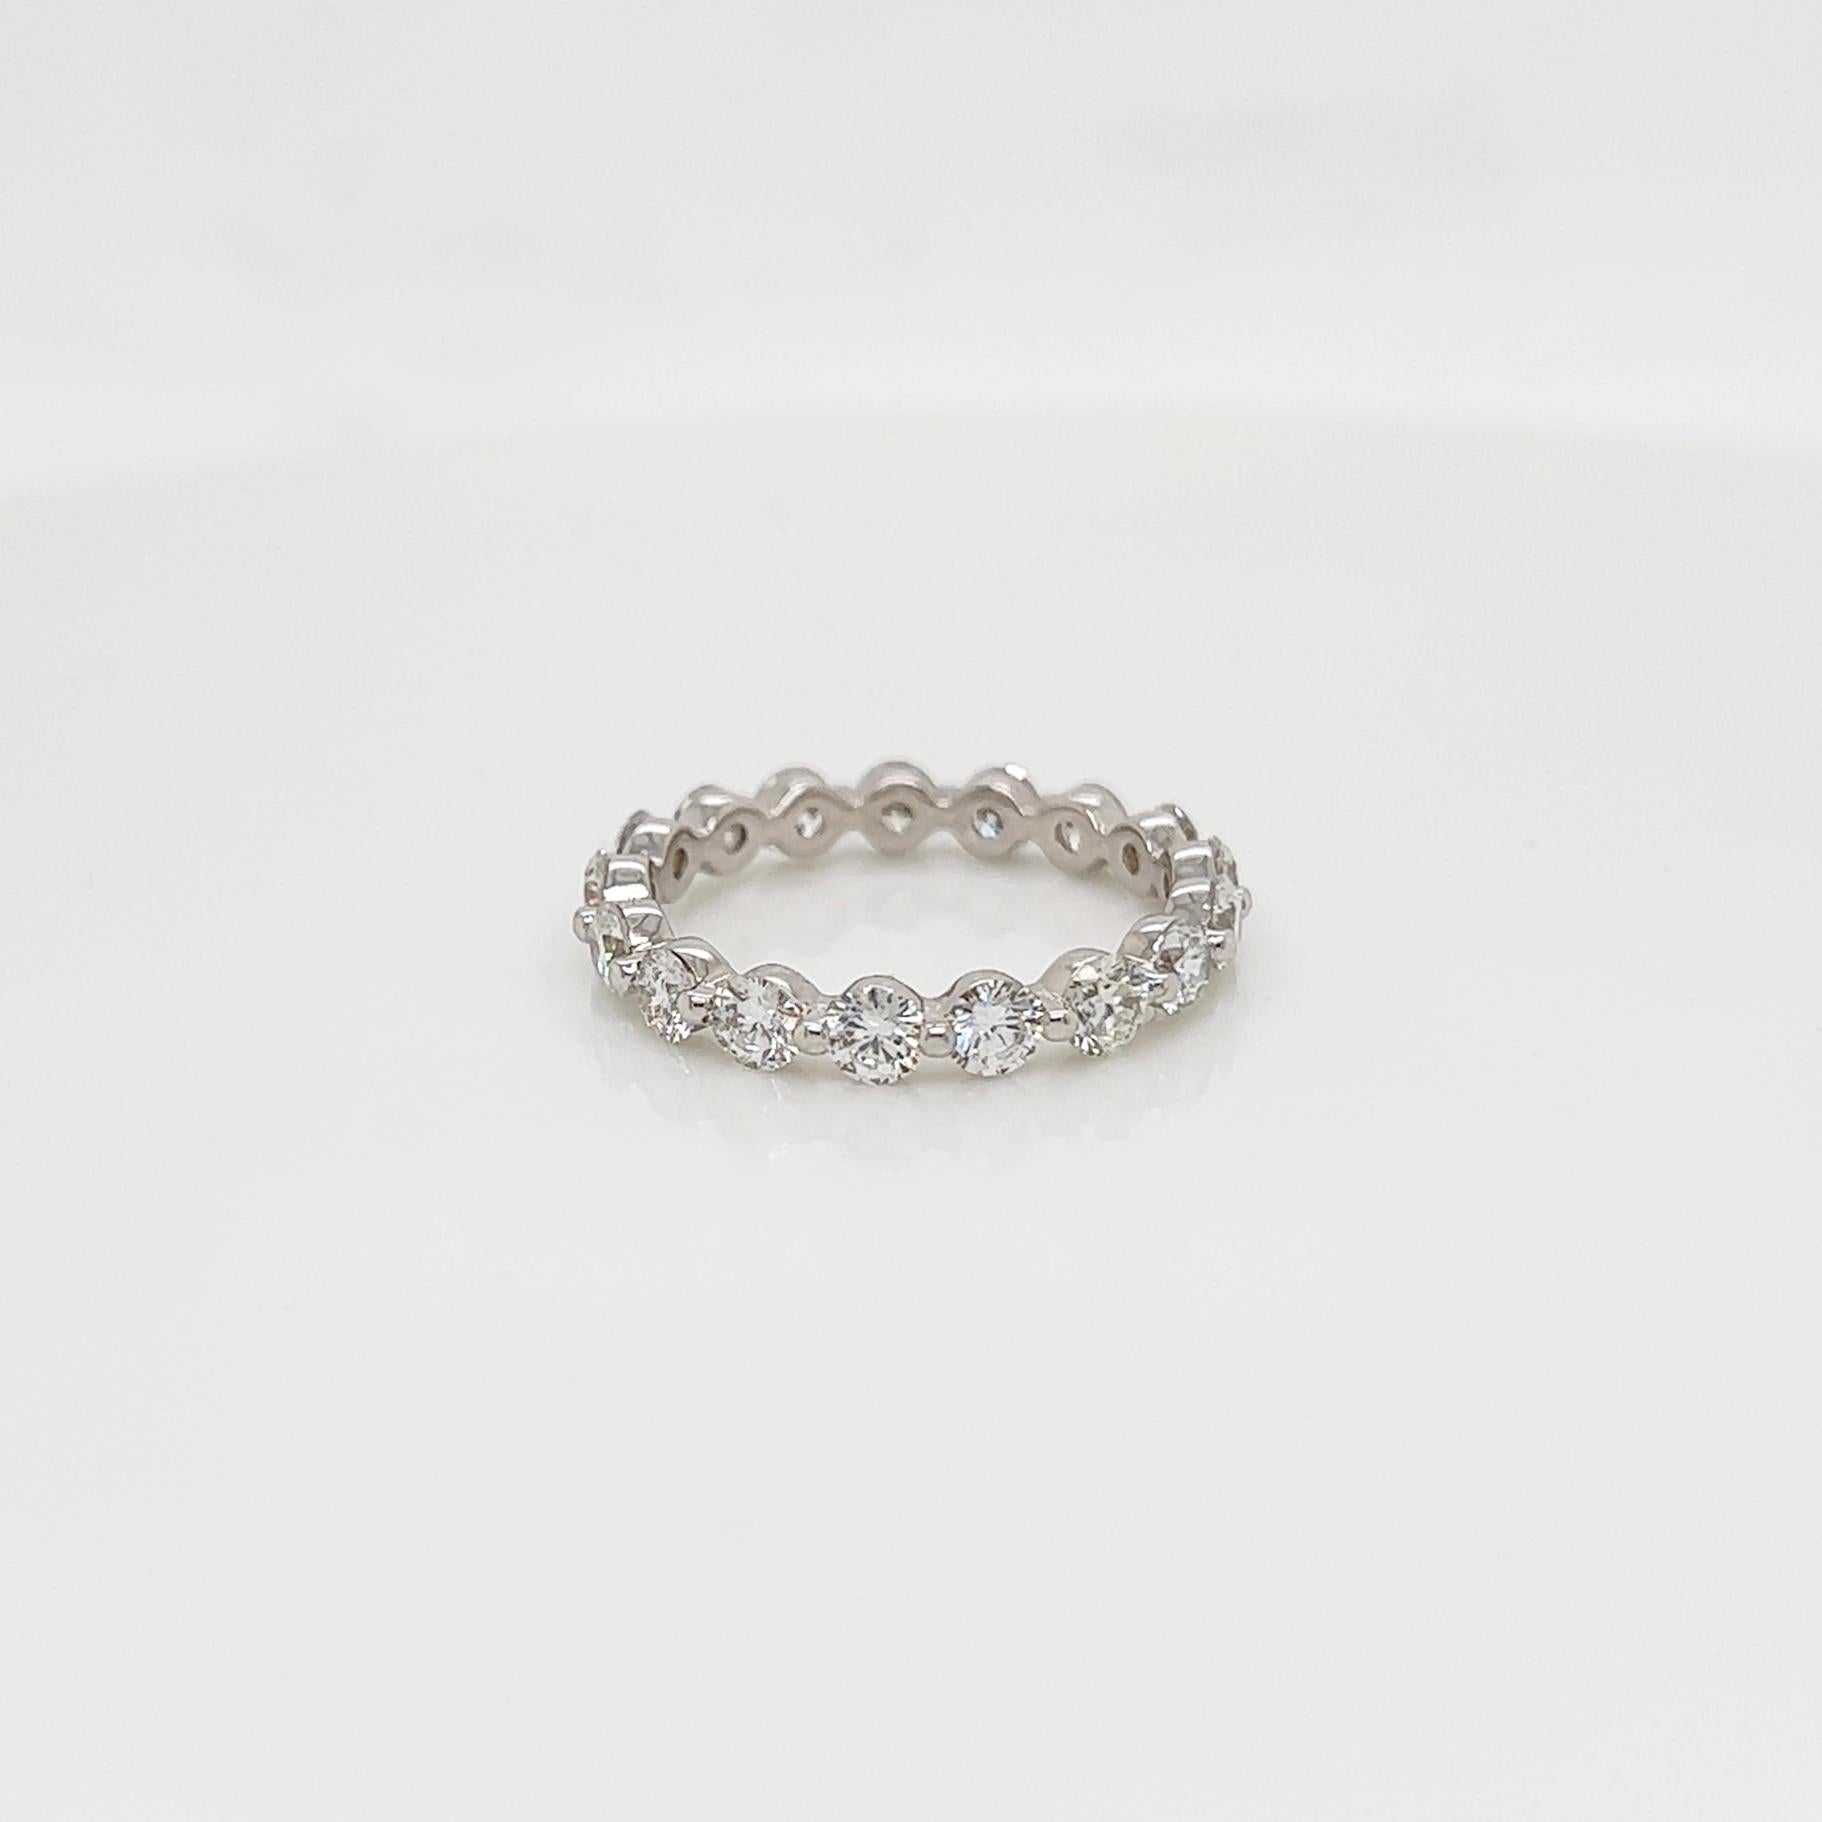 Ladies diamond Eternity band carries 1.90ct of brilliant cut diamonds placed in 14K white gold.

Size: 6.0
Color: G-H
Clarity: SI1+

This shared prong style Eternity band was handmade by our jewelers in New York City.